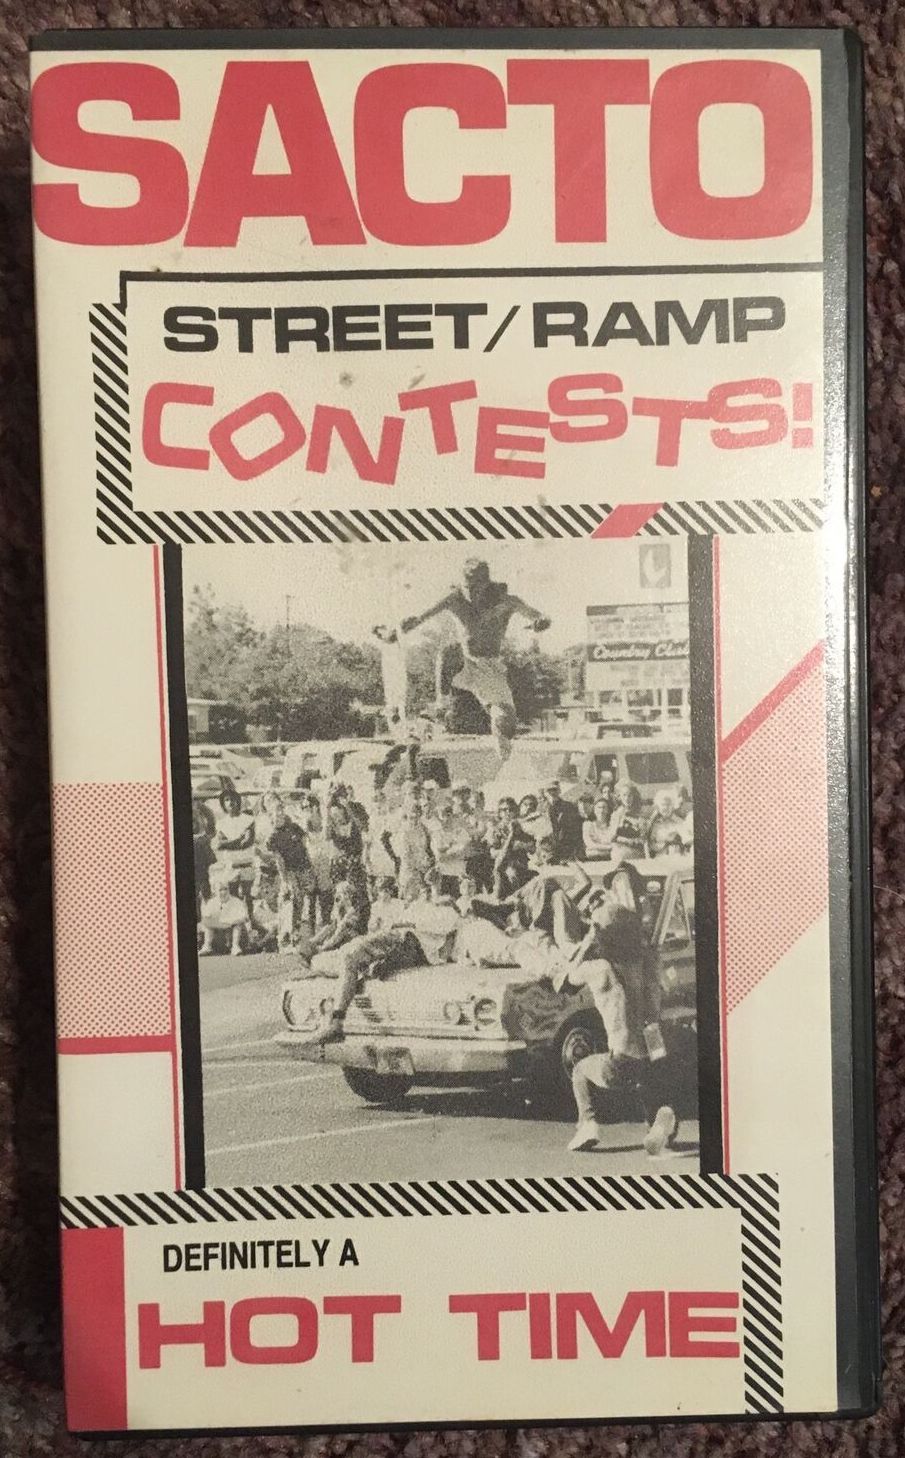 Sacto: Street/Ramp Contests! cover